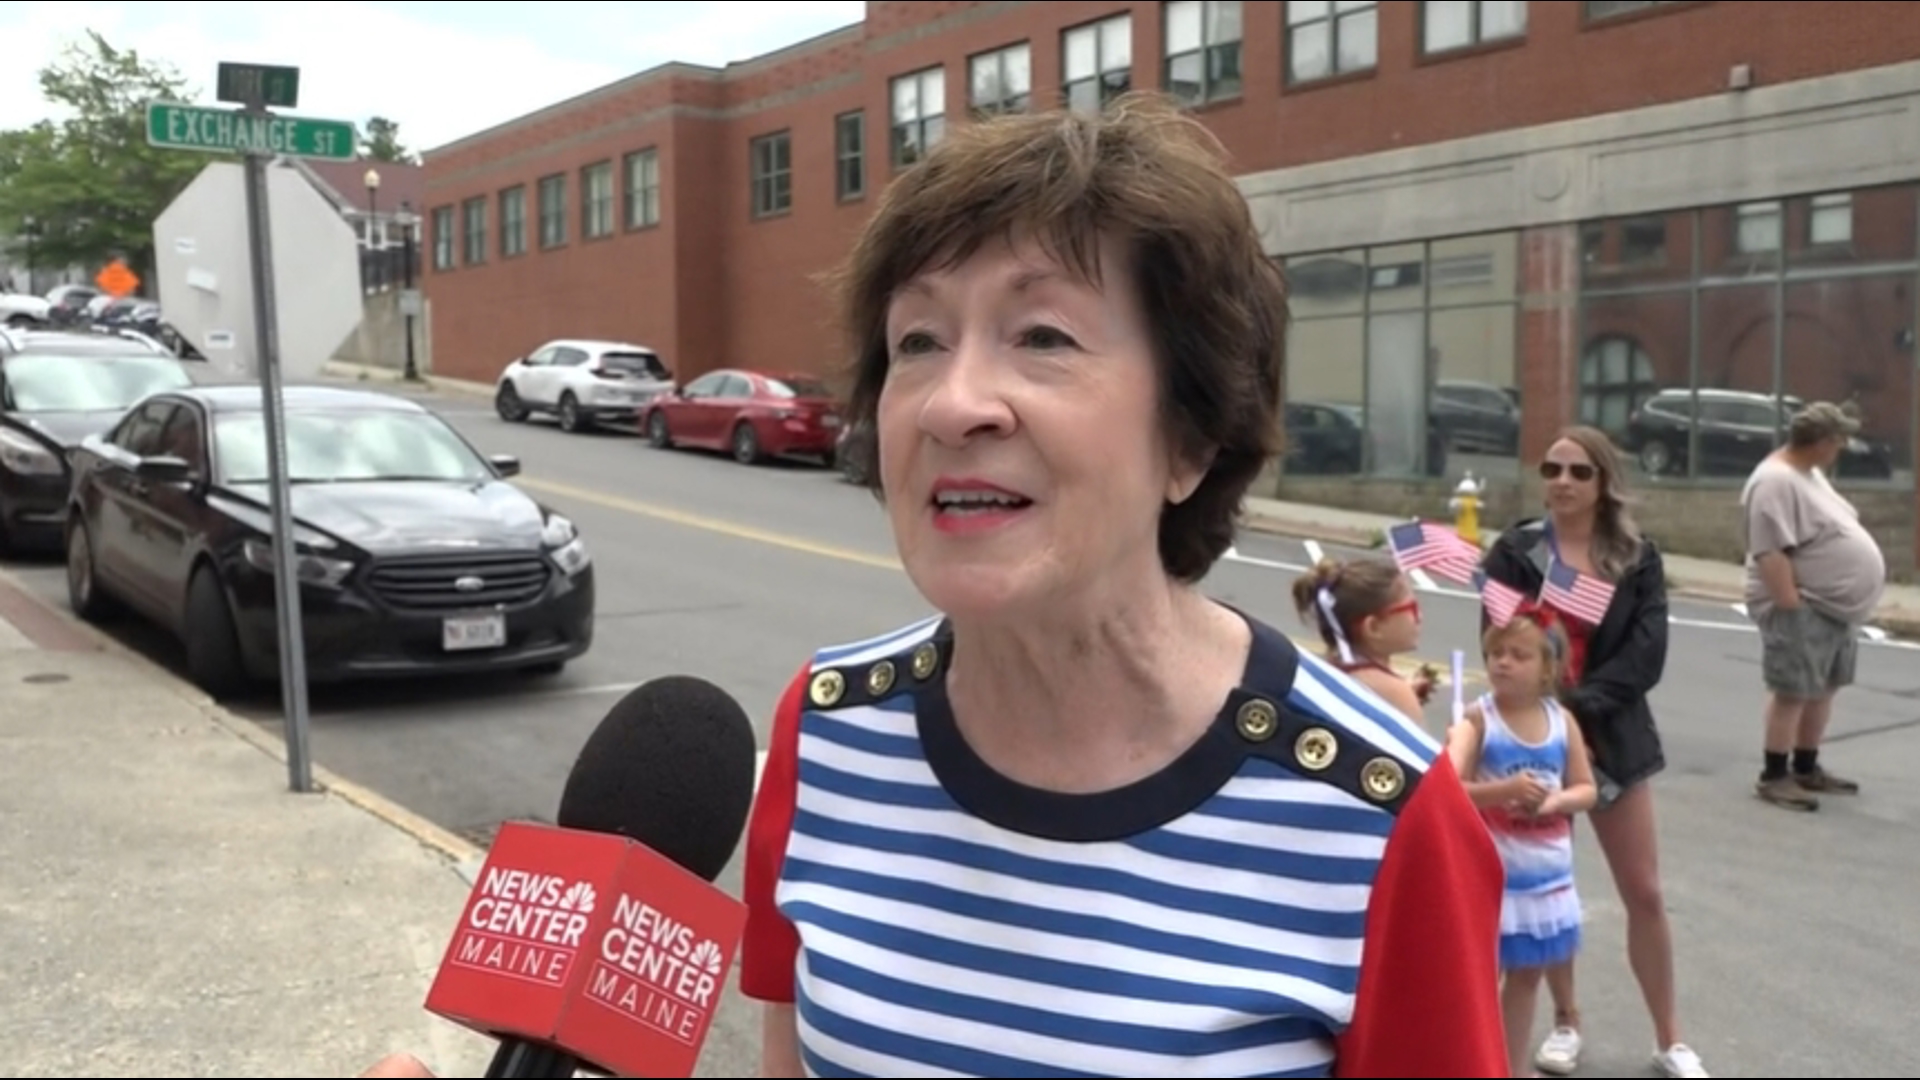 There are growing concerns about President Joe Biden after a poor showing at the first presidential debate. Sen. Susan Collins, R-Maine, shared her thoughts.